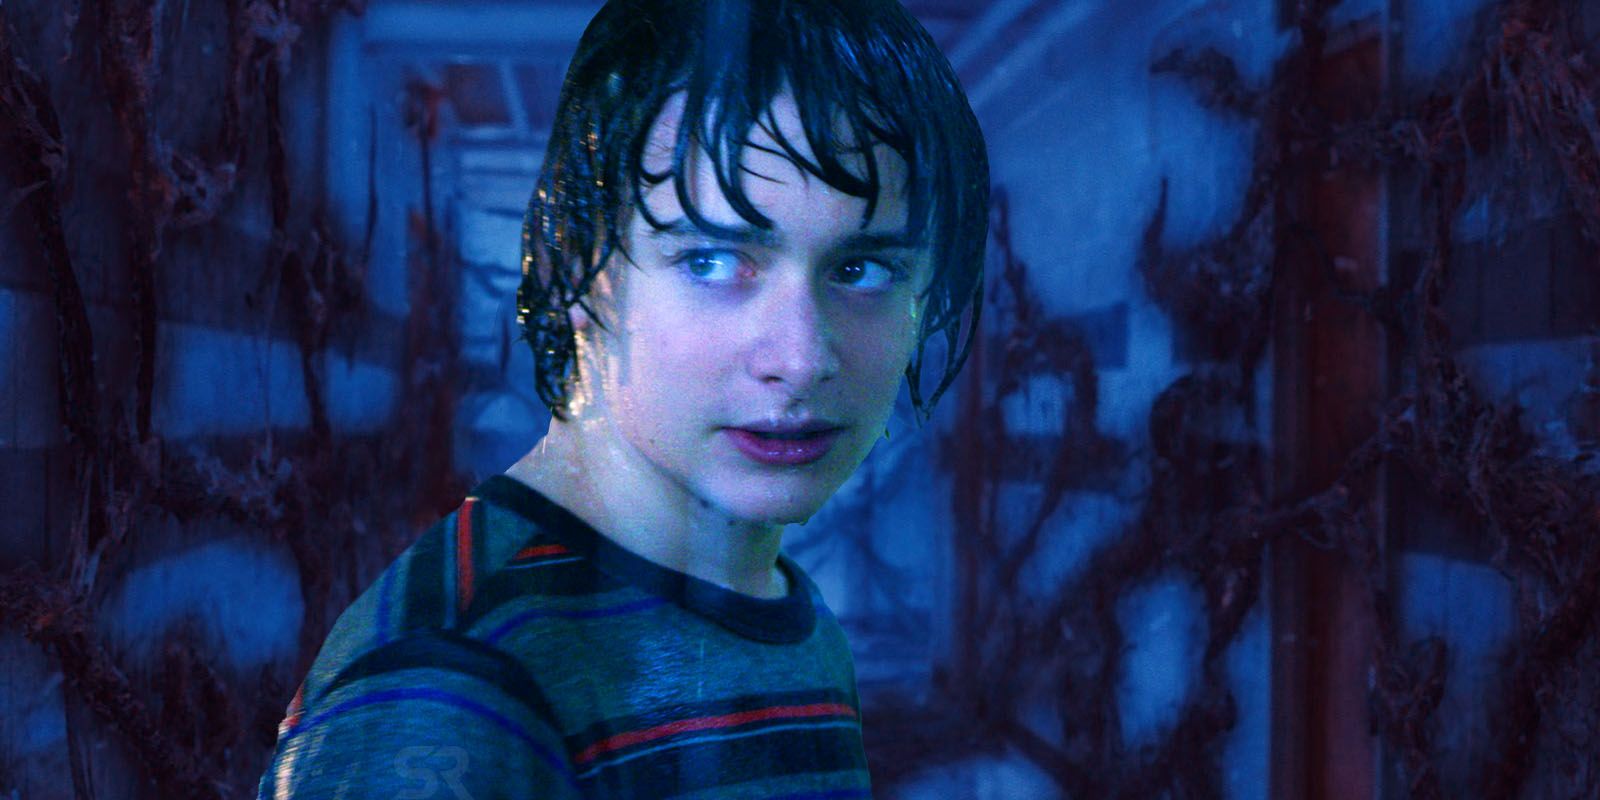 Stranger Things Fans Have A Theory Will Byers Is Actually 'Evil